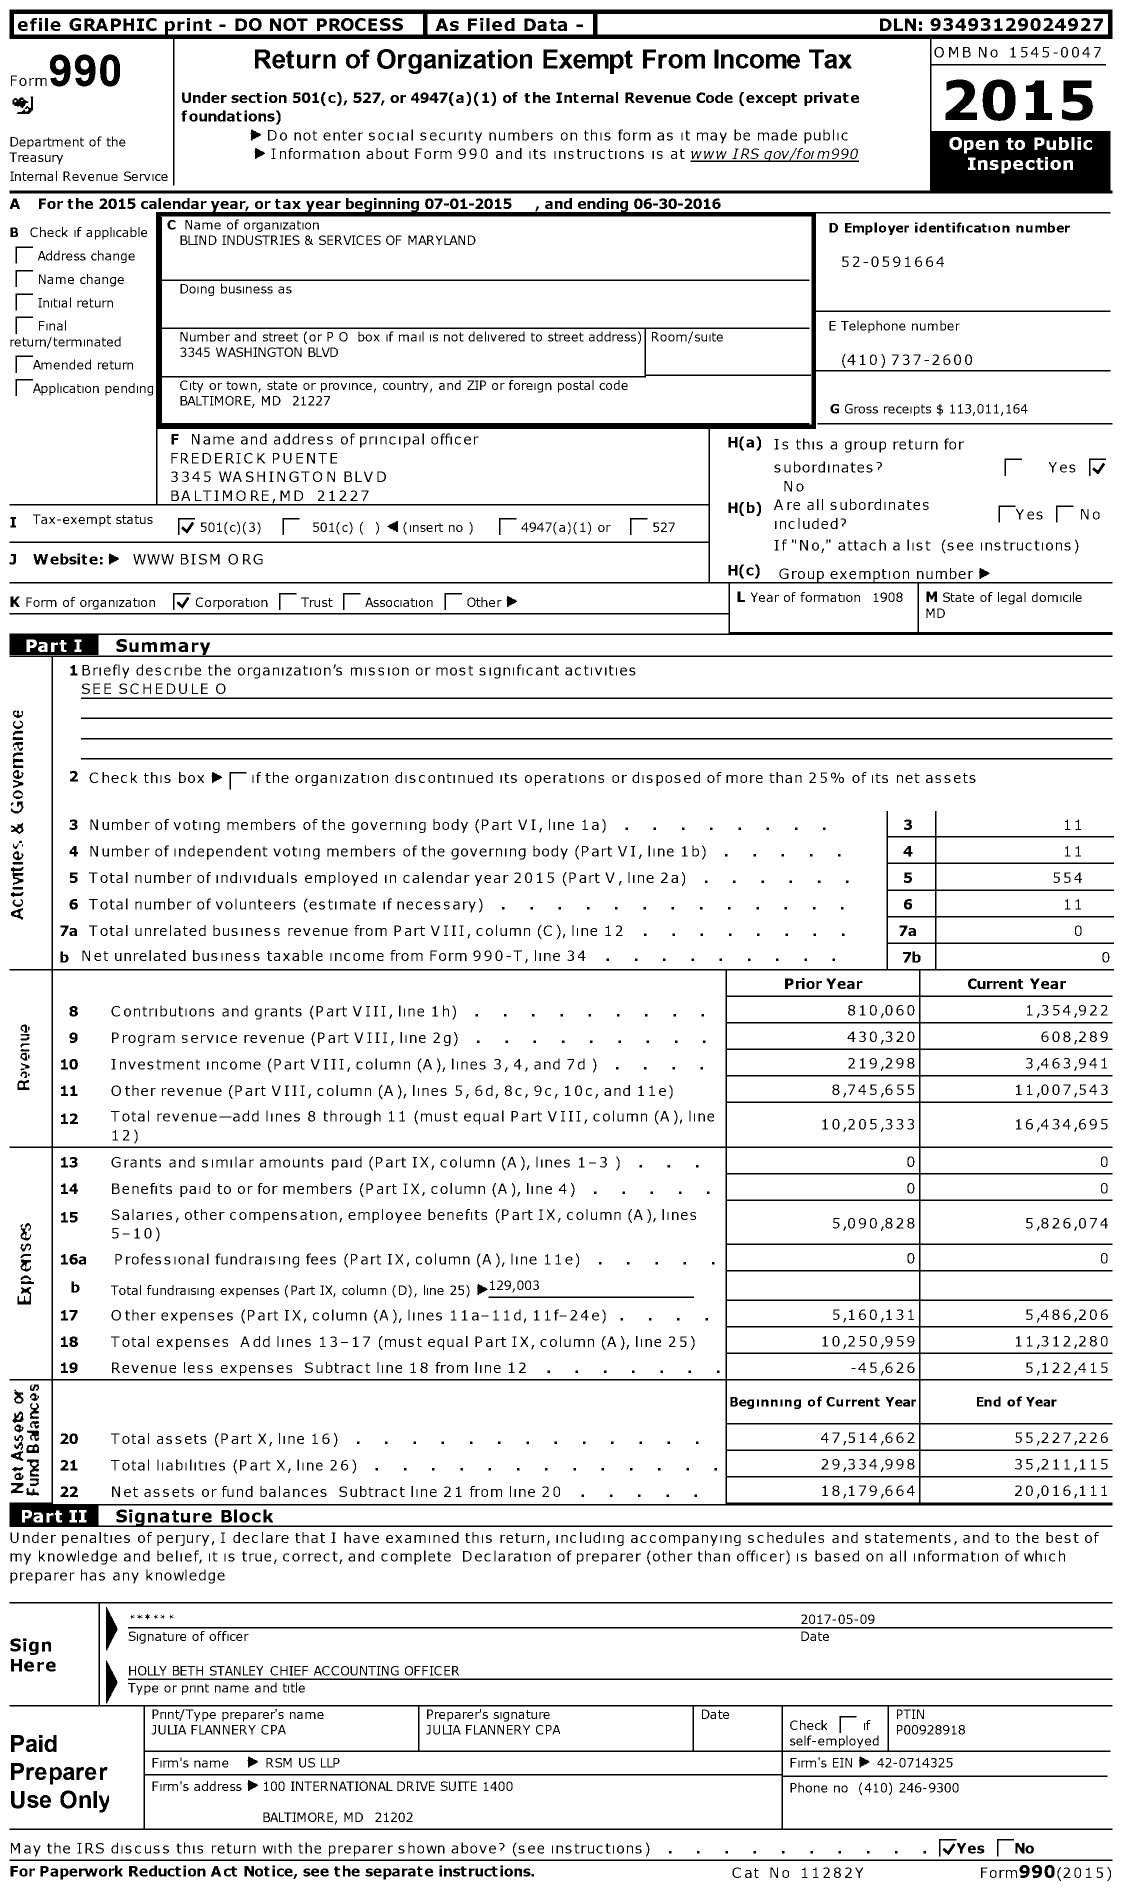 Image of first page of 2015 Form 990 for Blind Industries & Services of Maryland (BISM)